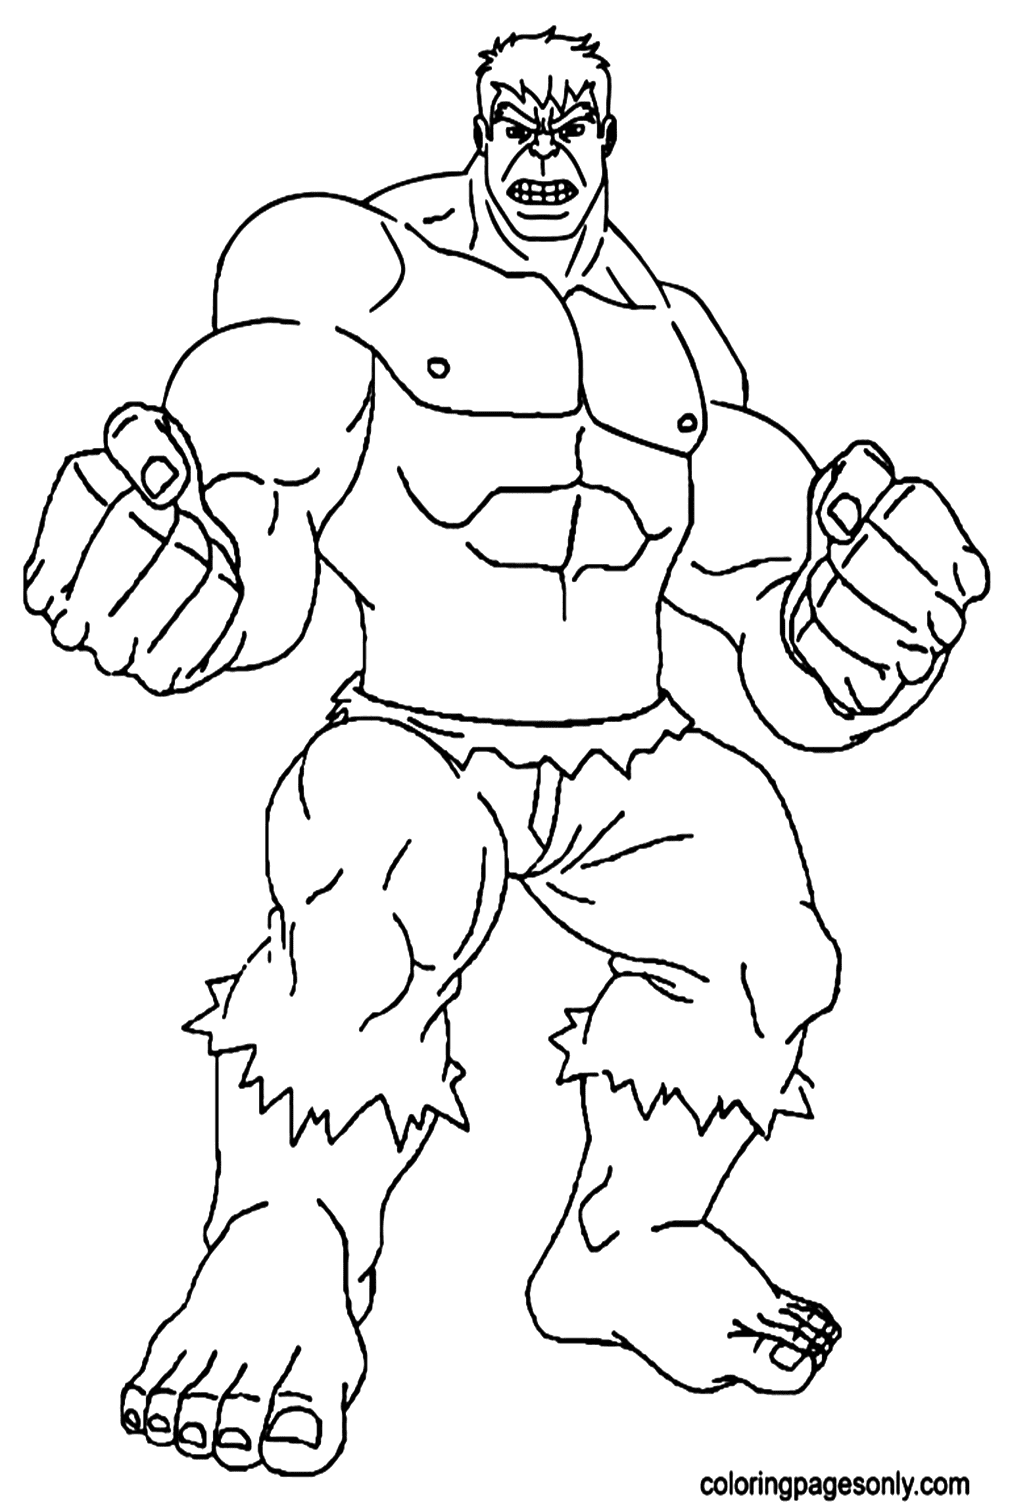 Excellent Hulk Coloring Pages